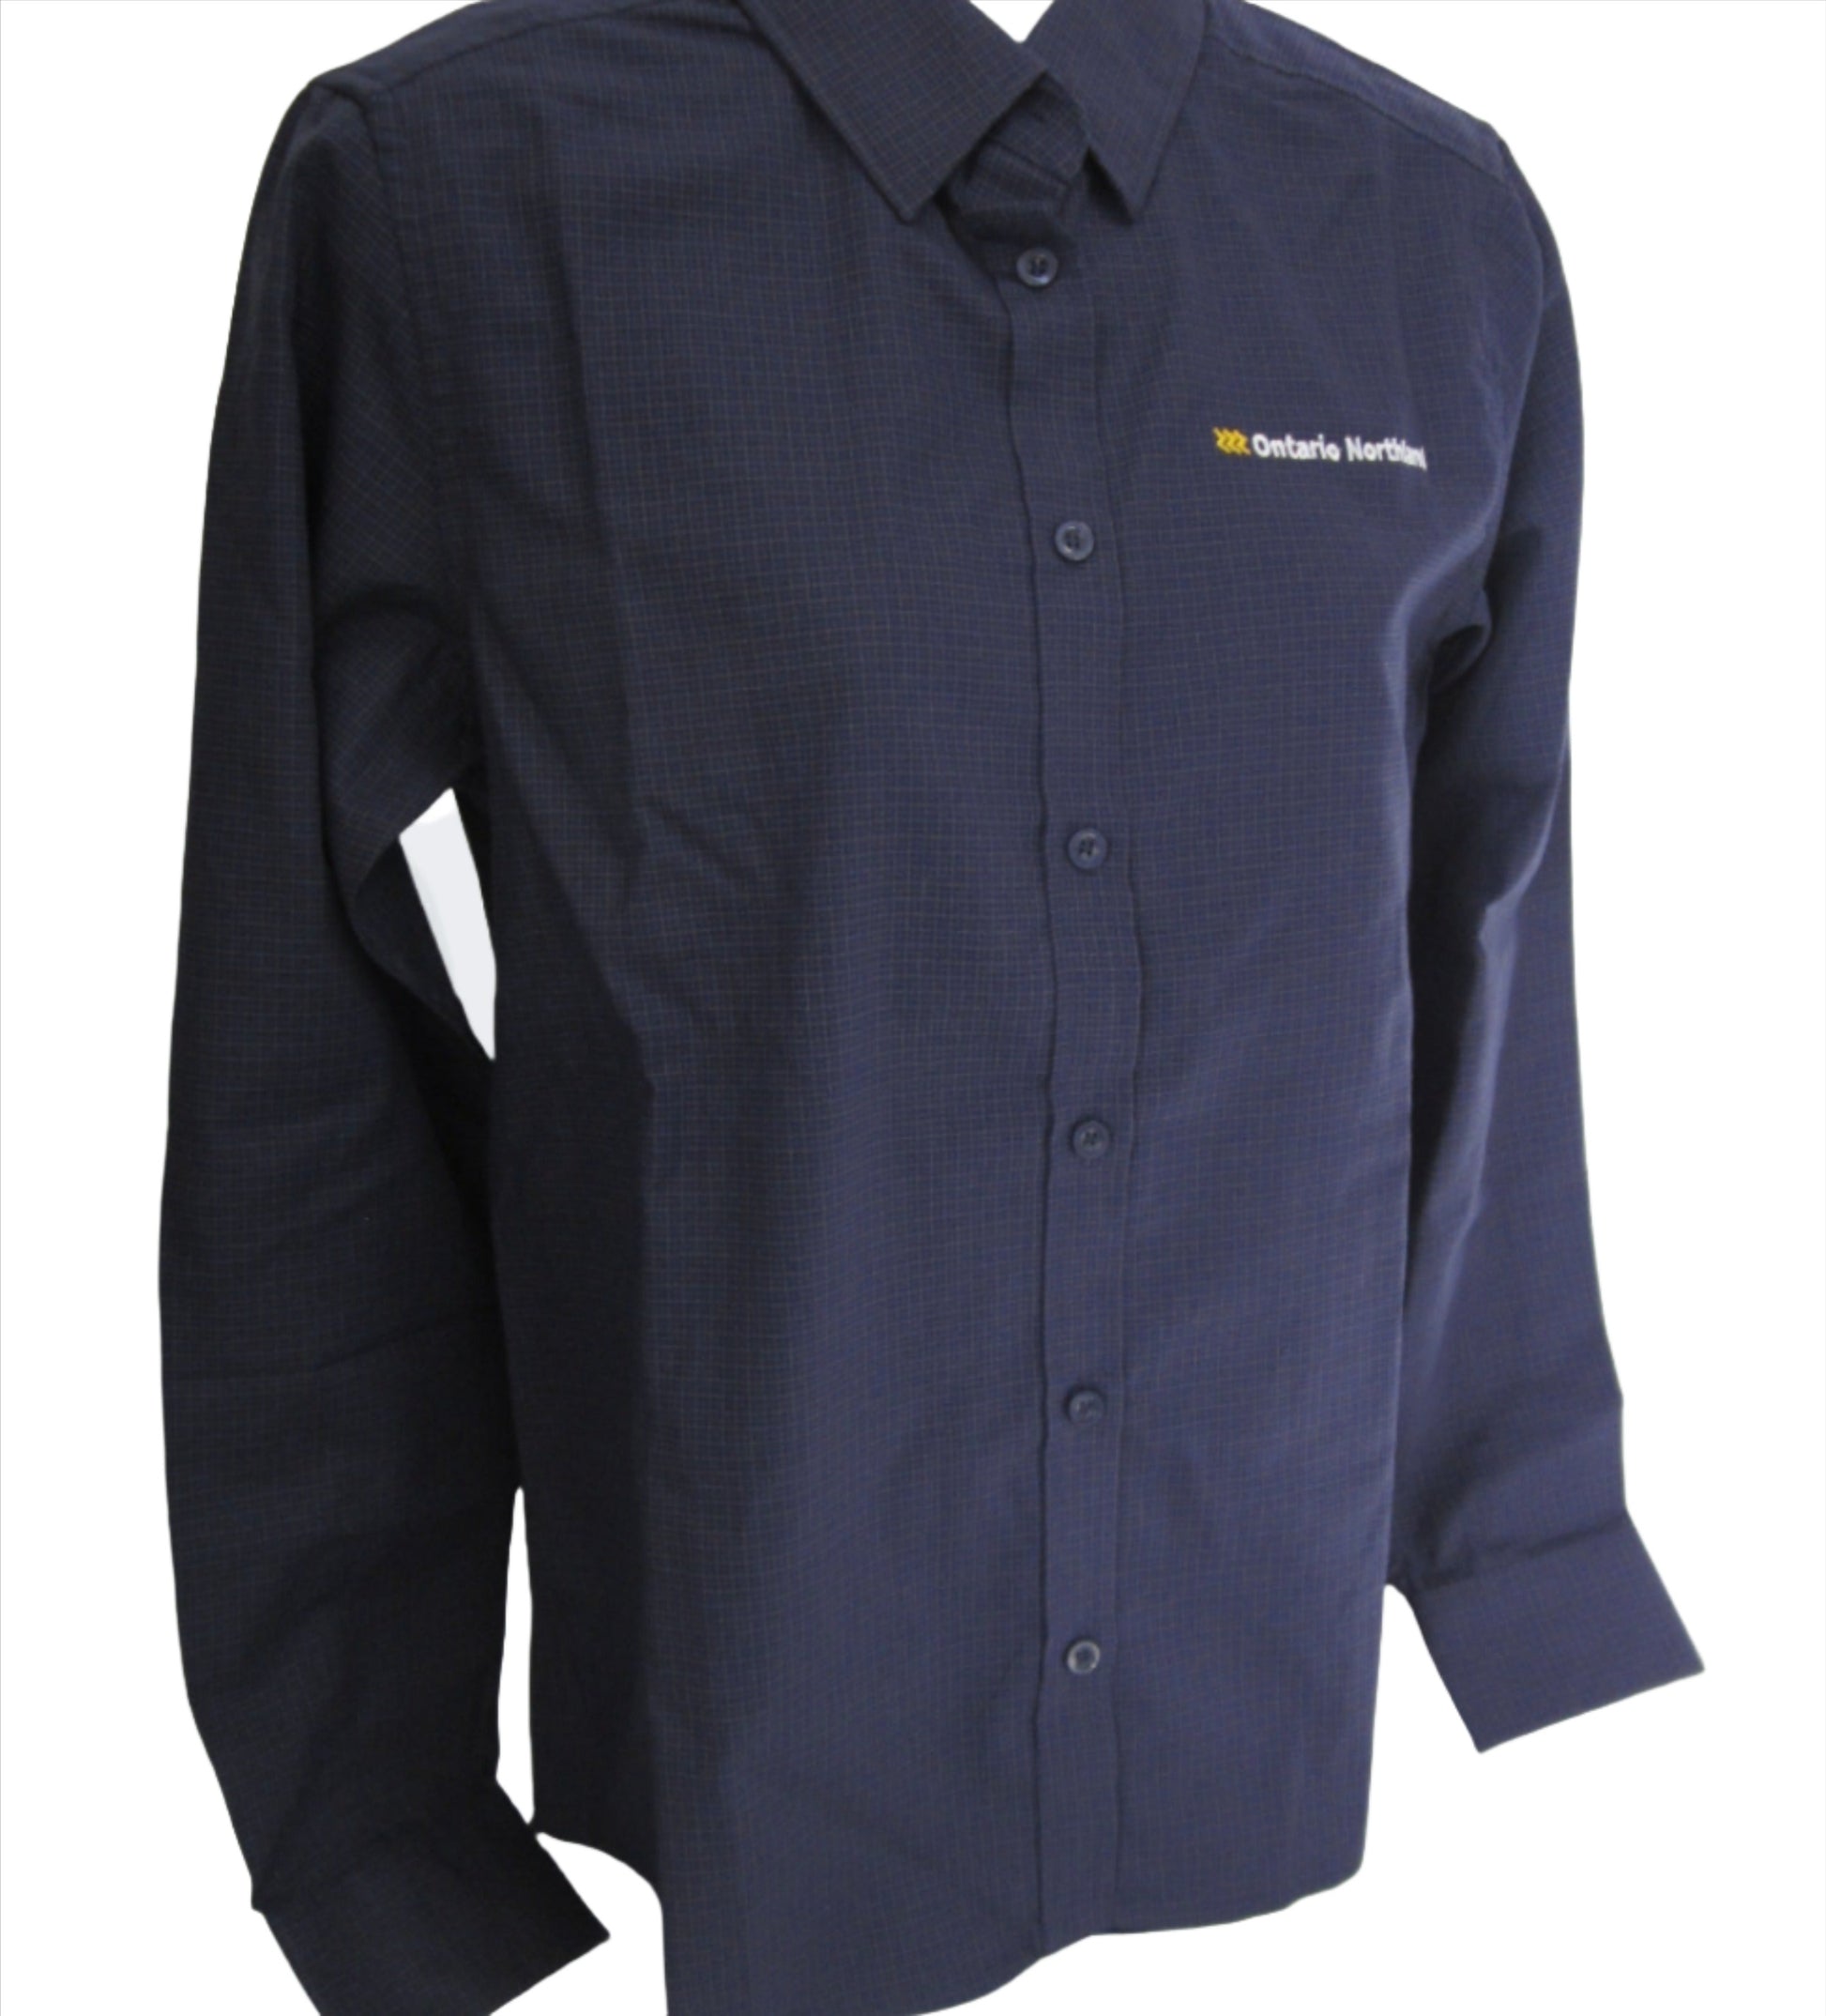 Ladies' Business Shirt from Ontario Northland, navy/carbon